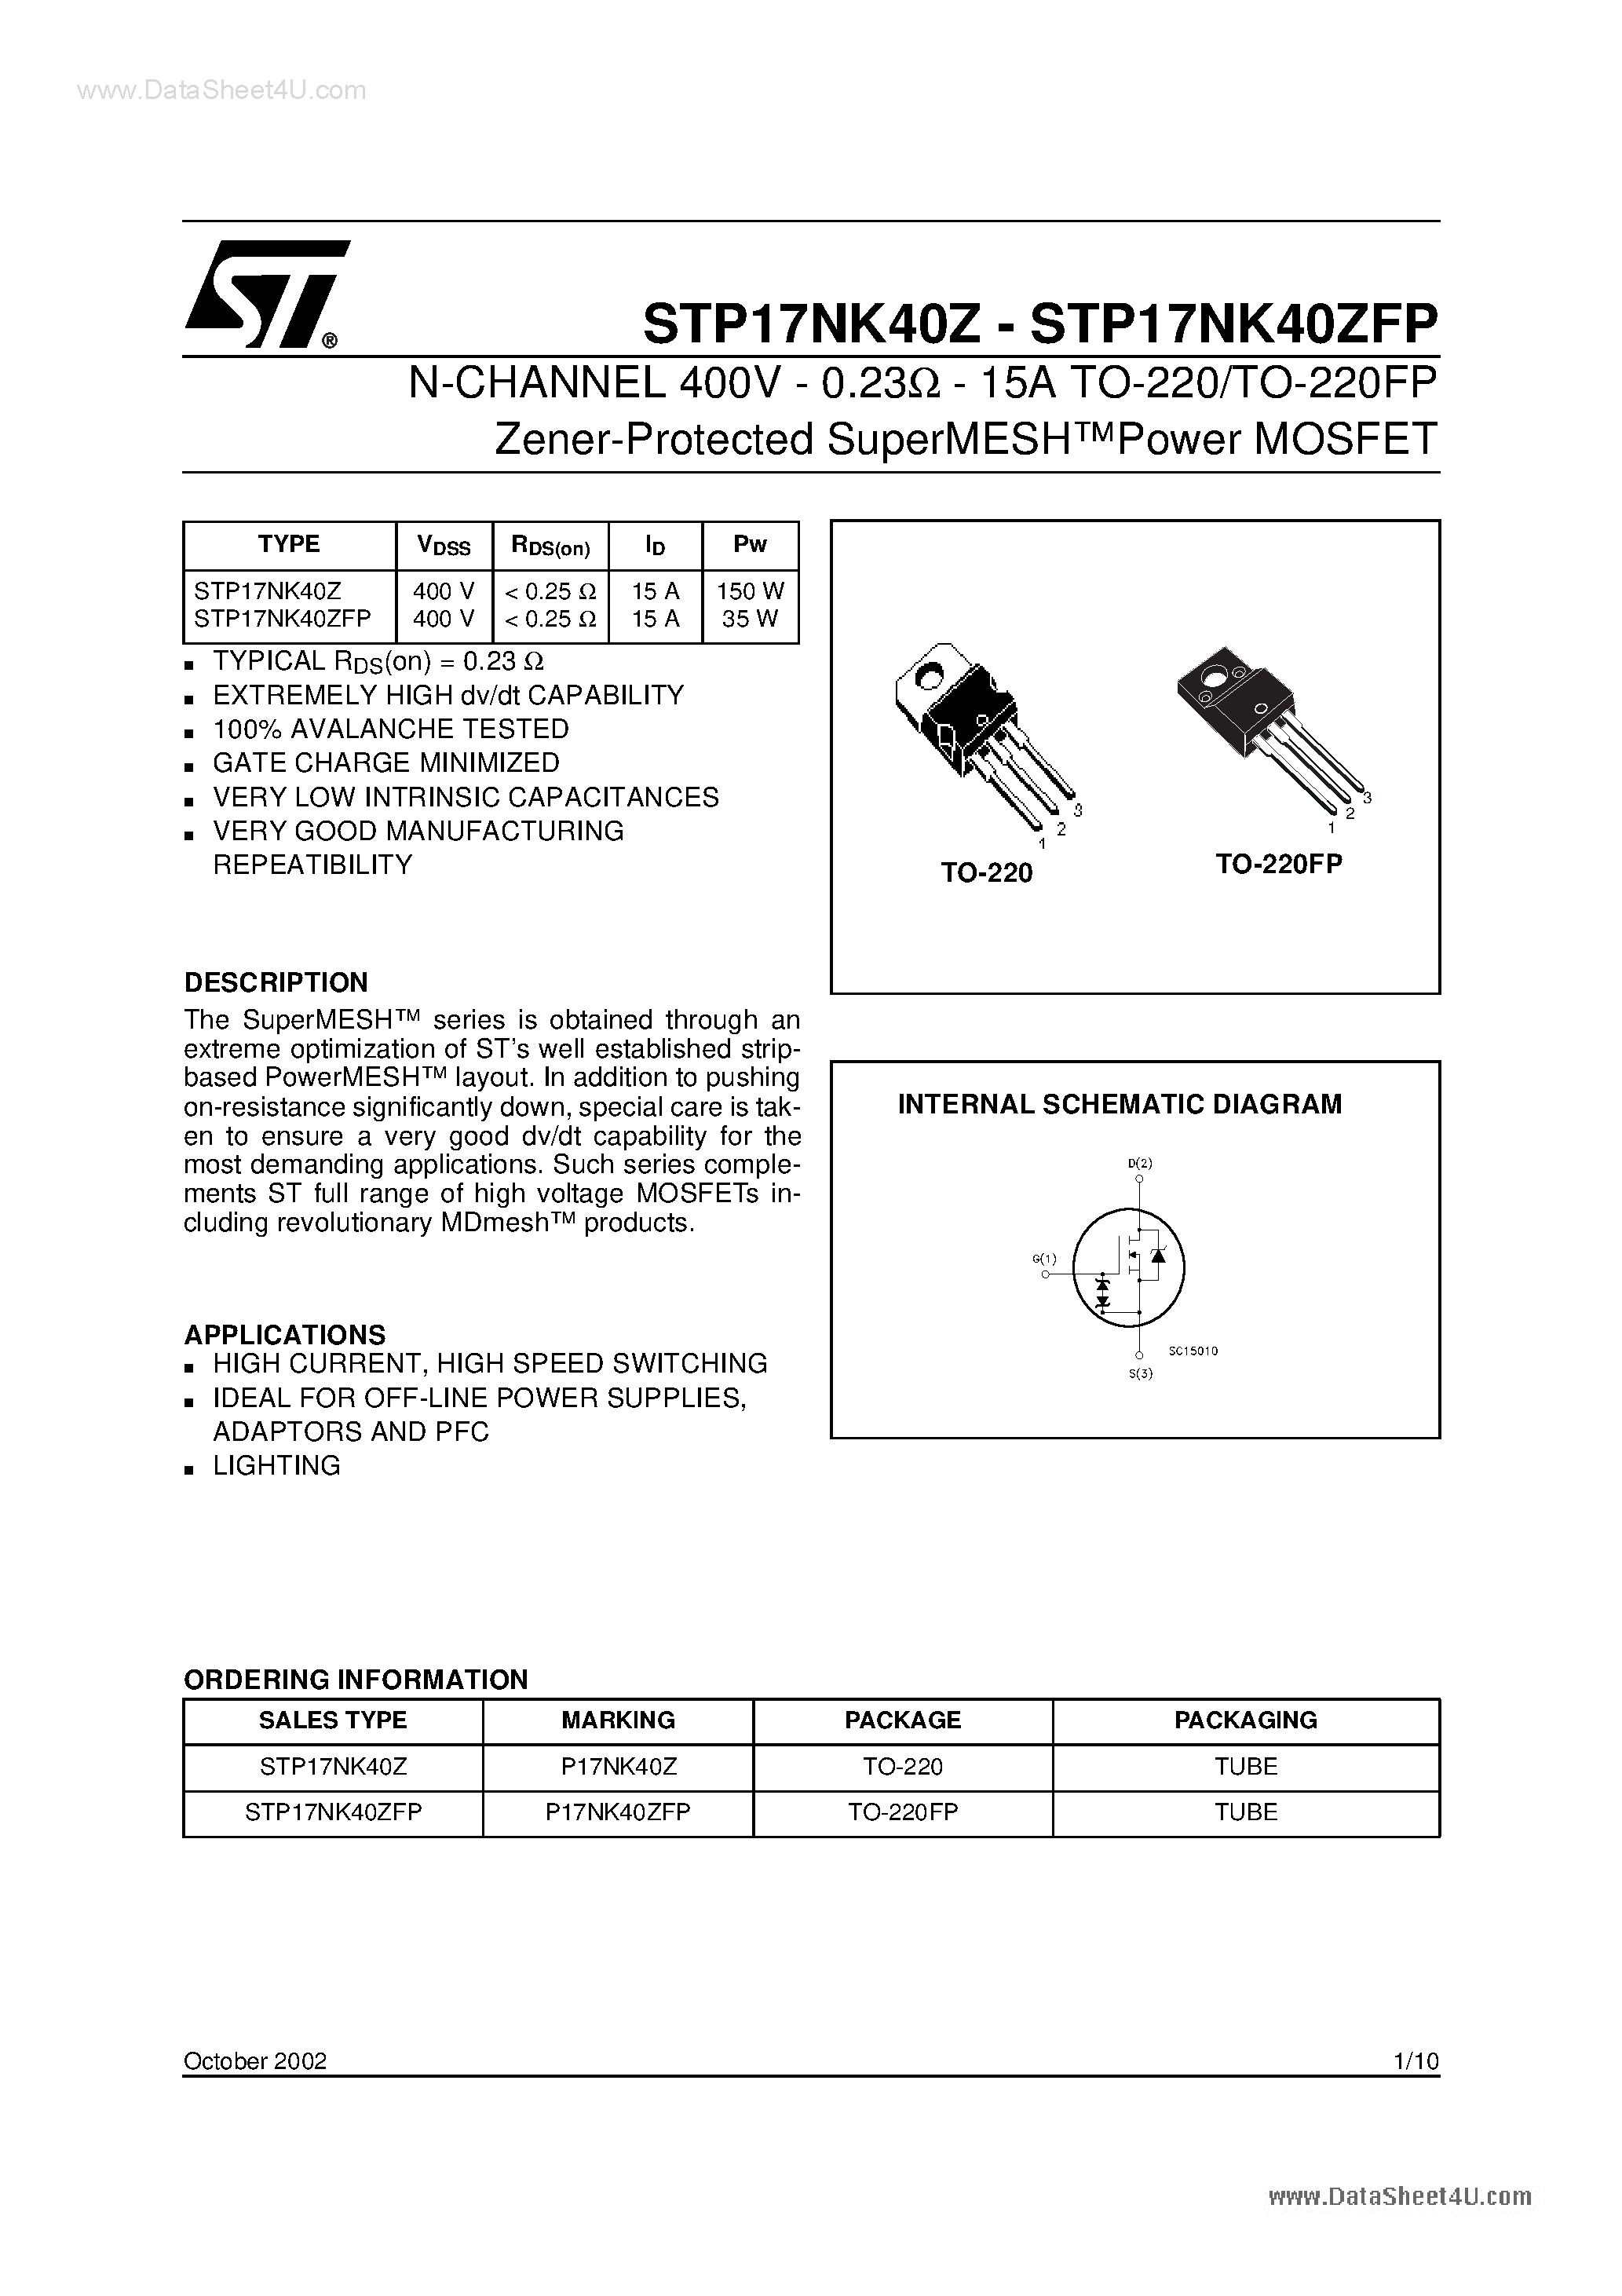 Datasheet STP17NK40Z - N-CHANNEL Power MOSFET page 1